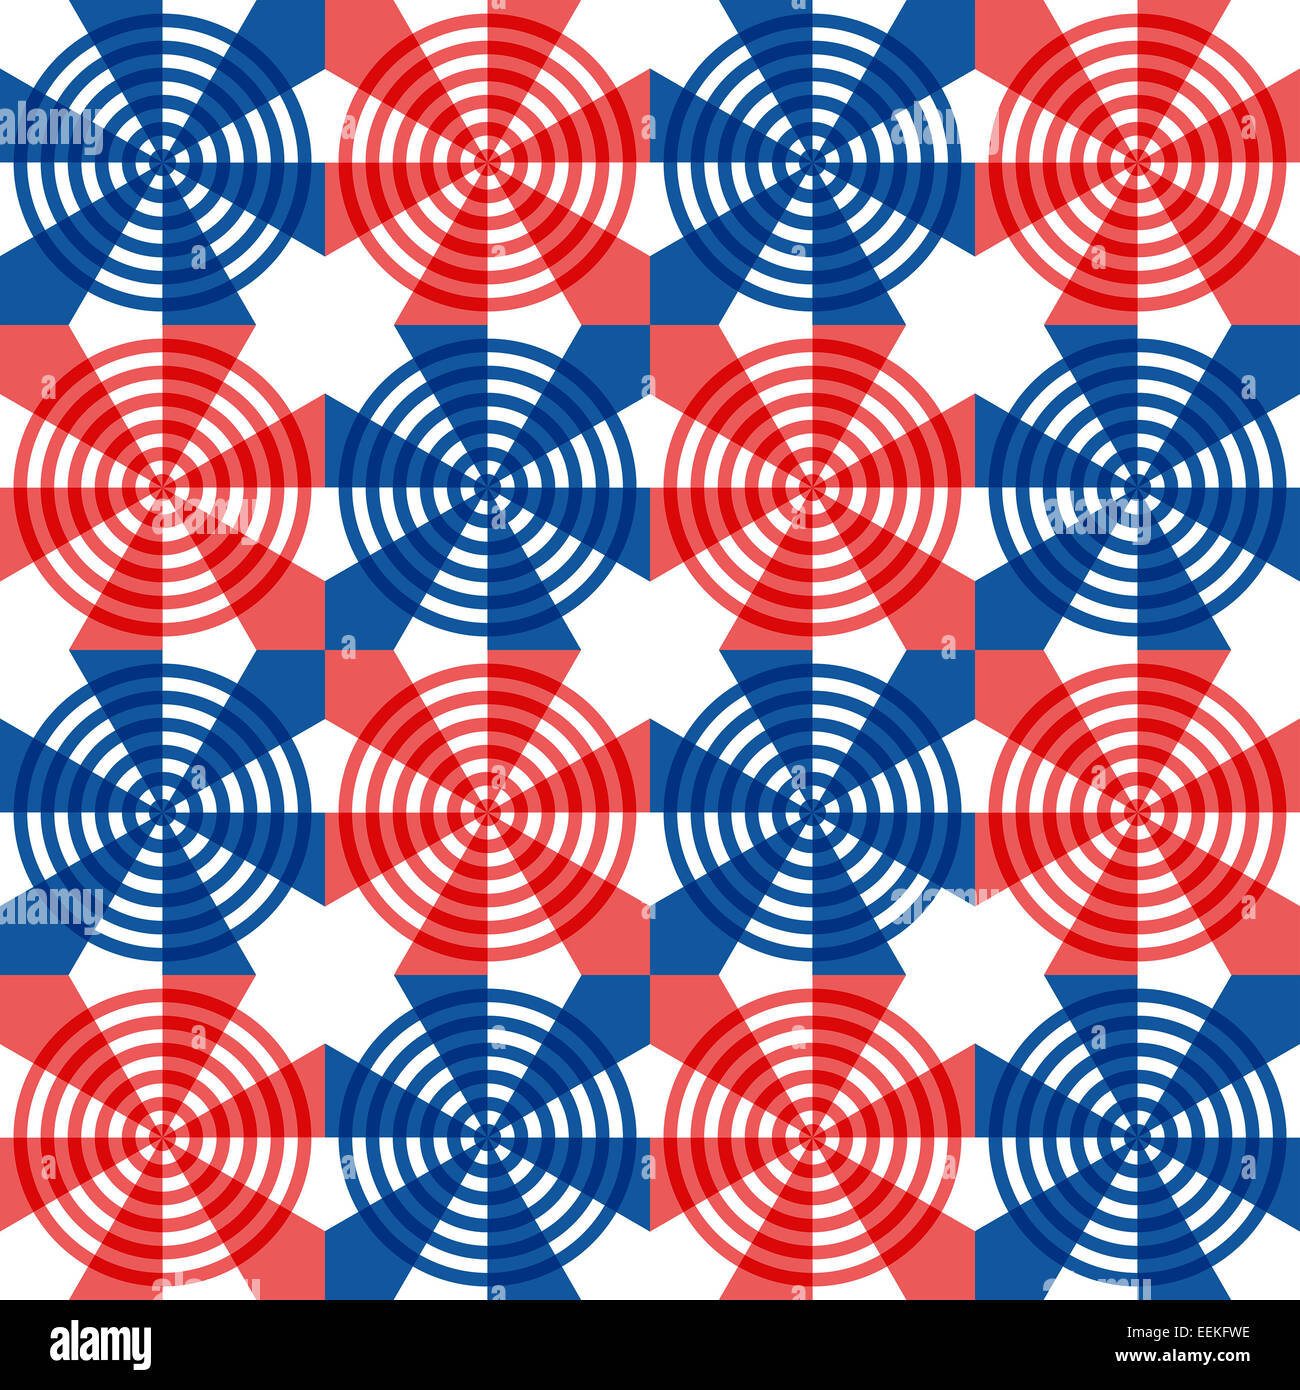 Red, white and blue stars and stripes in a festive seamless pattern Stock Photo